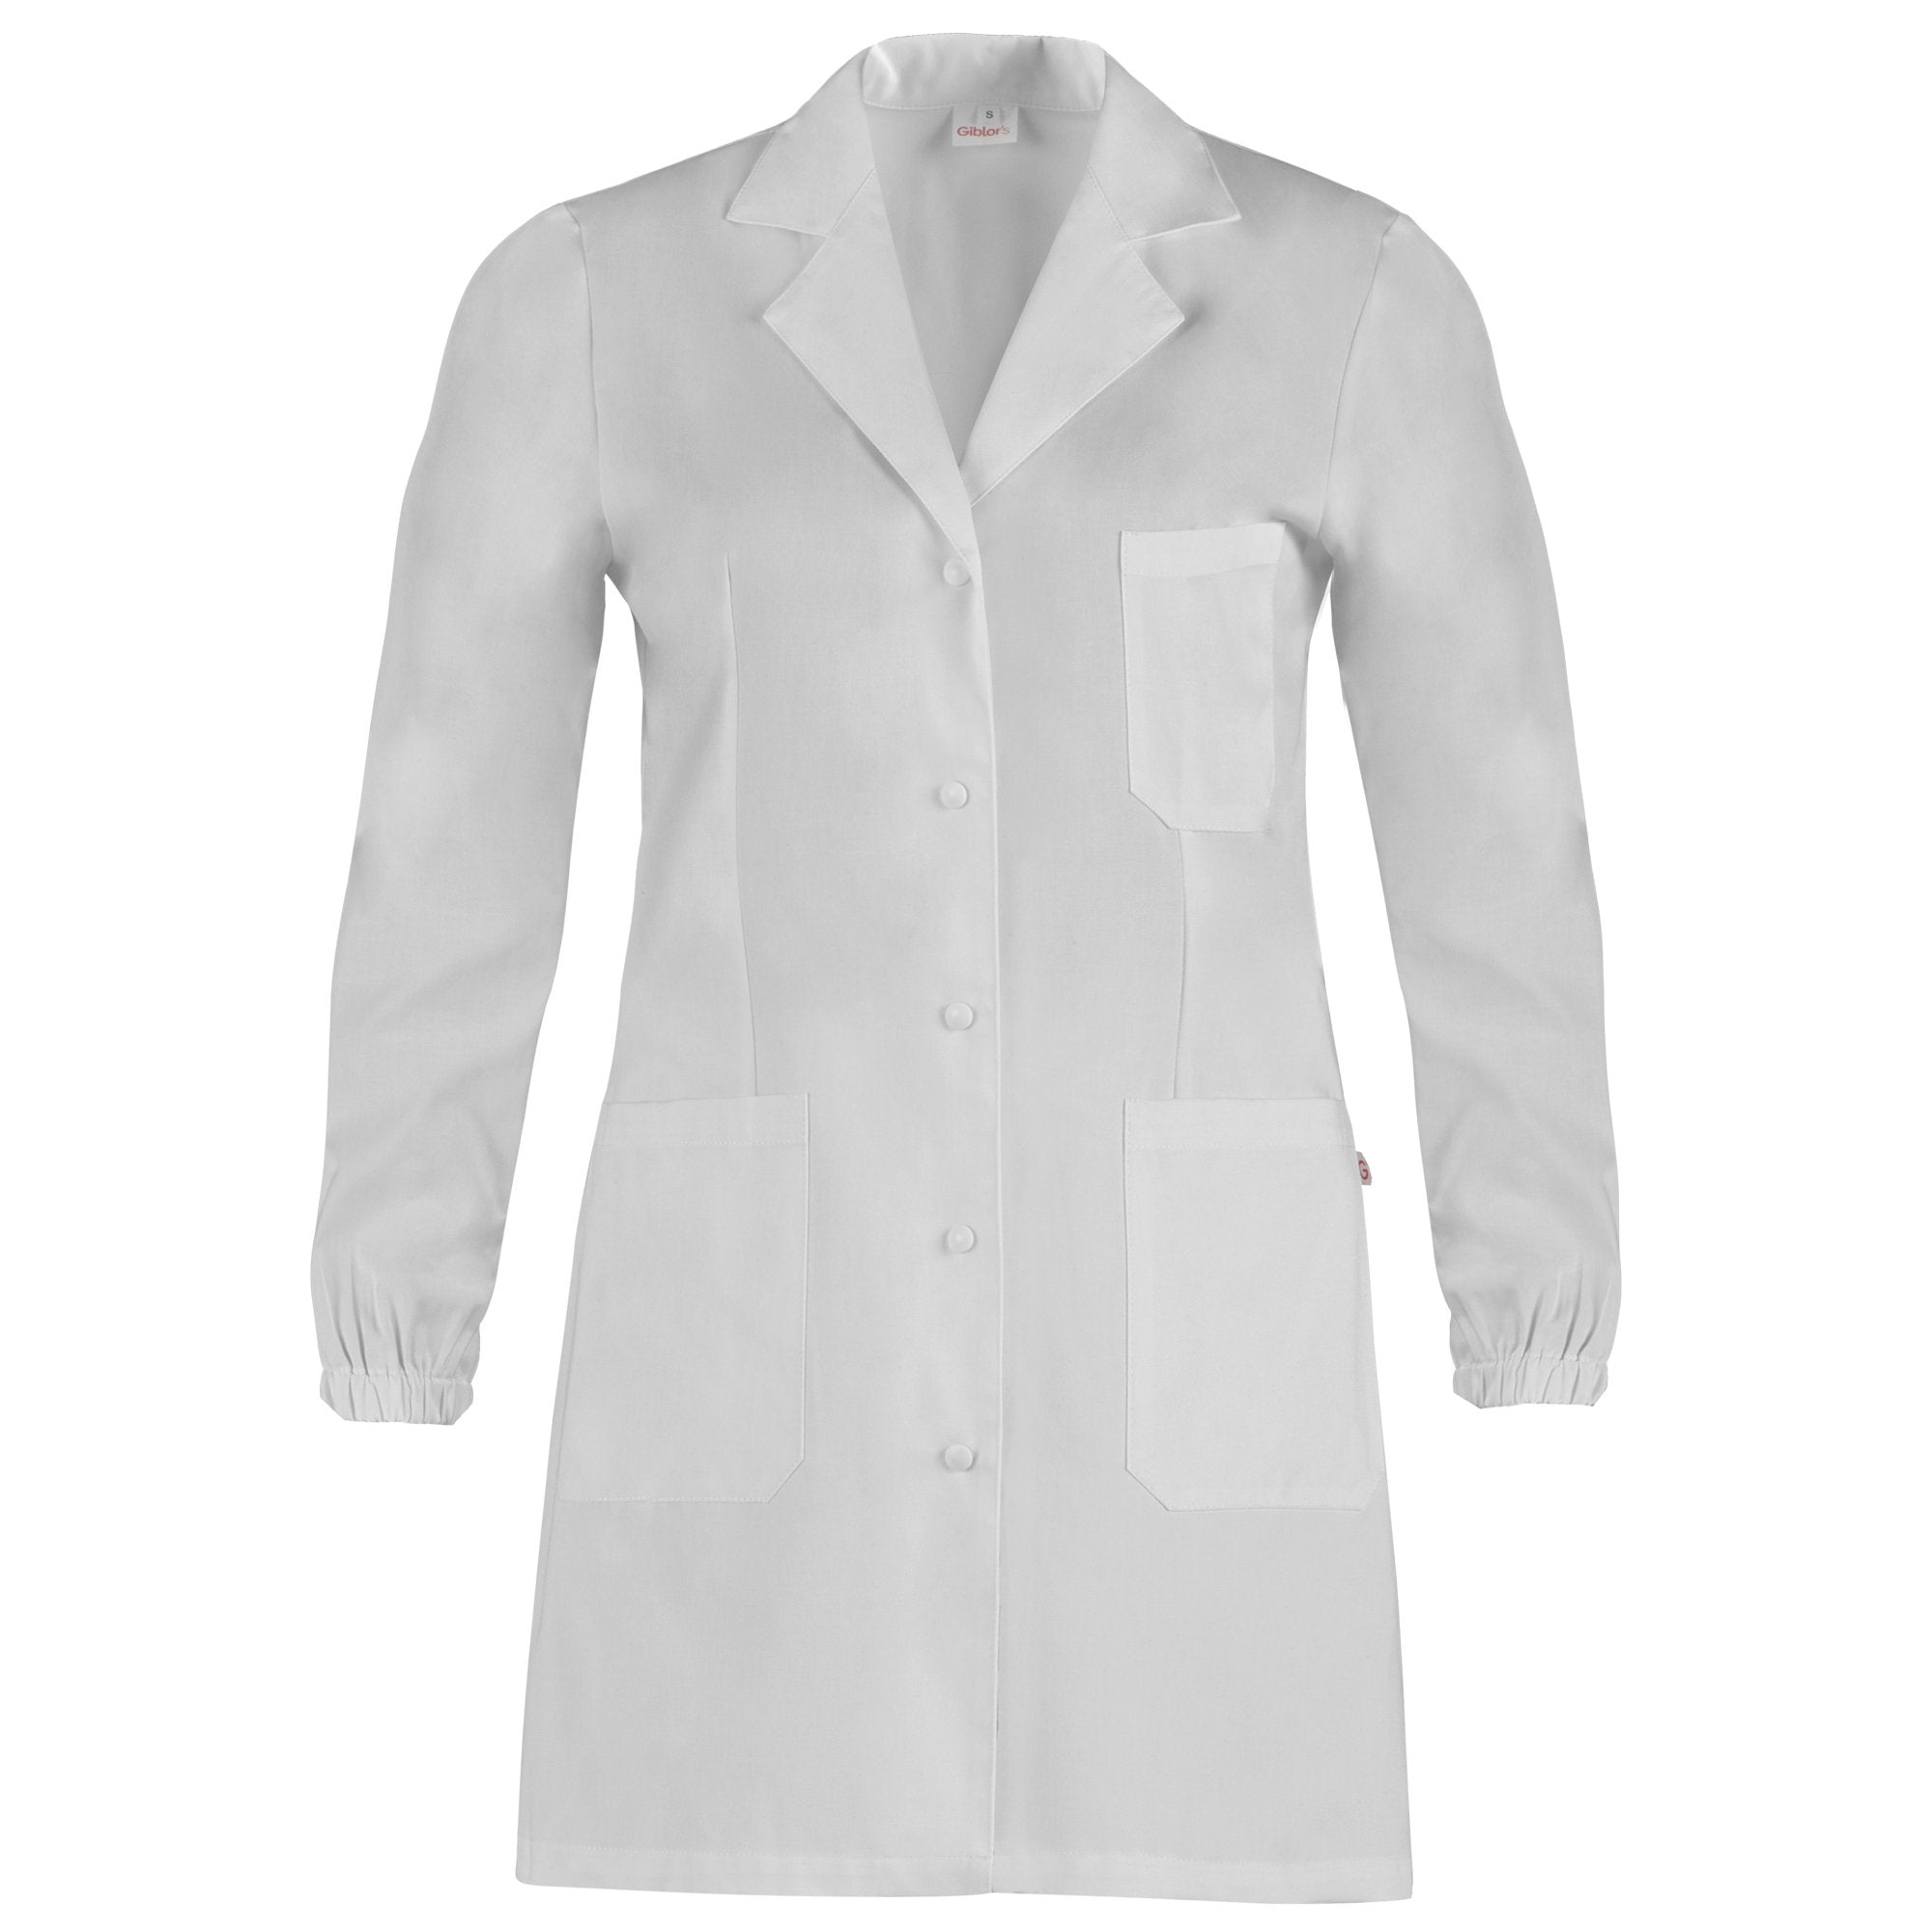 giblor's-camice-ospedaliero-milly-donna-tg-s-bianco